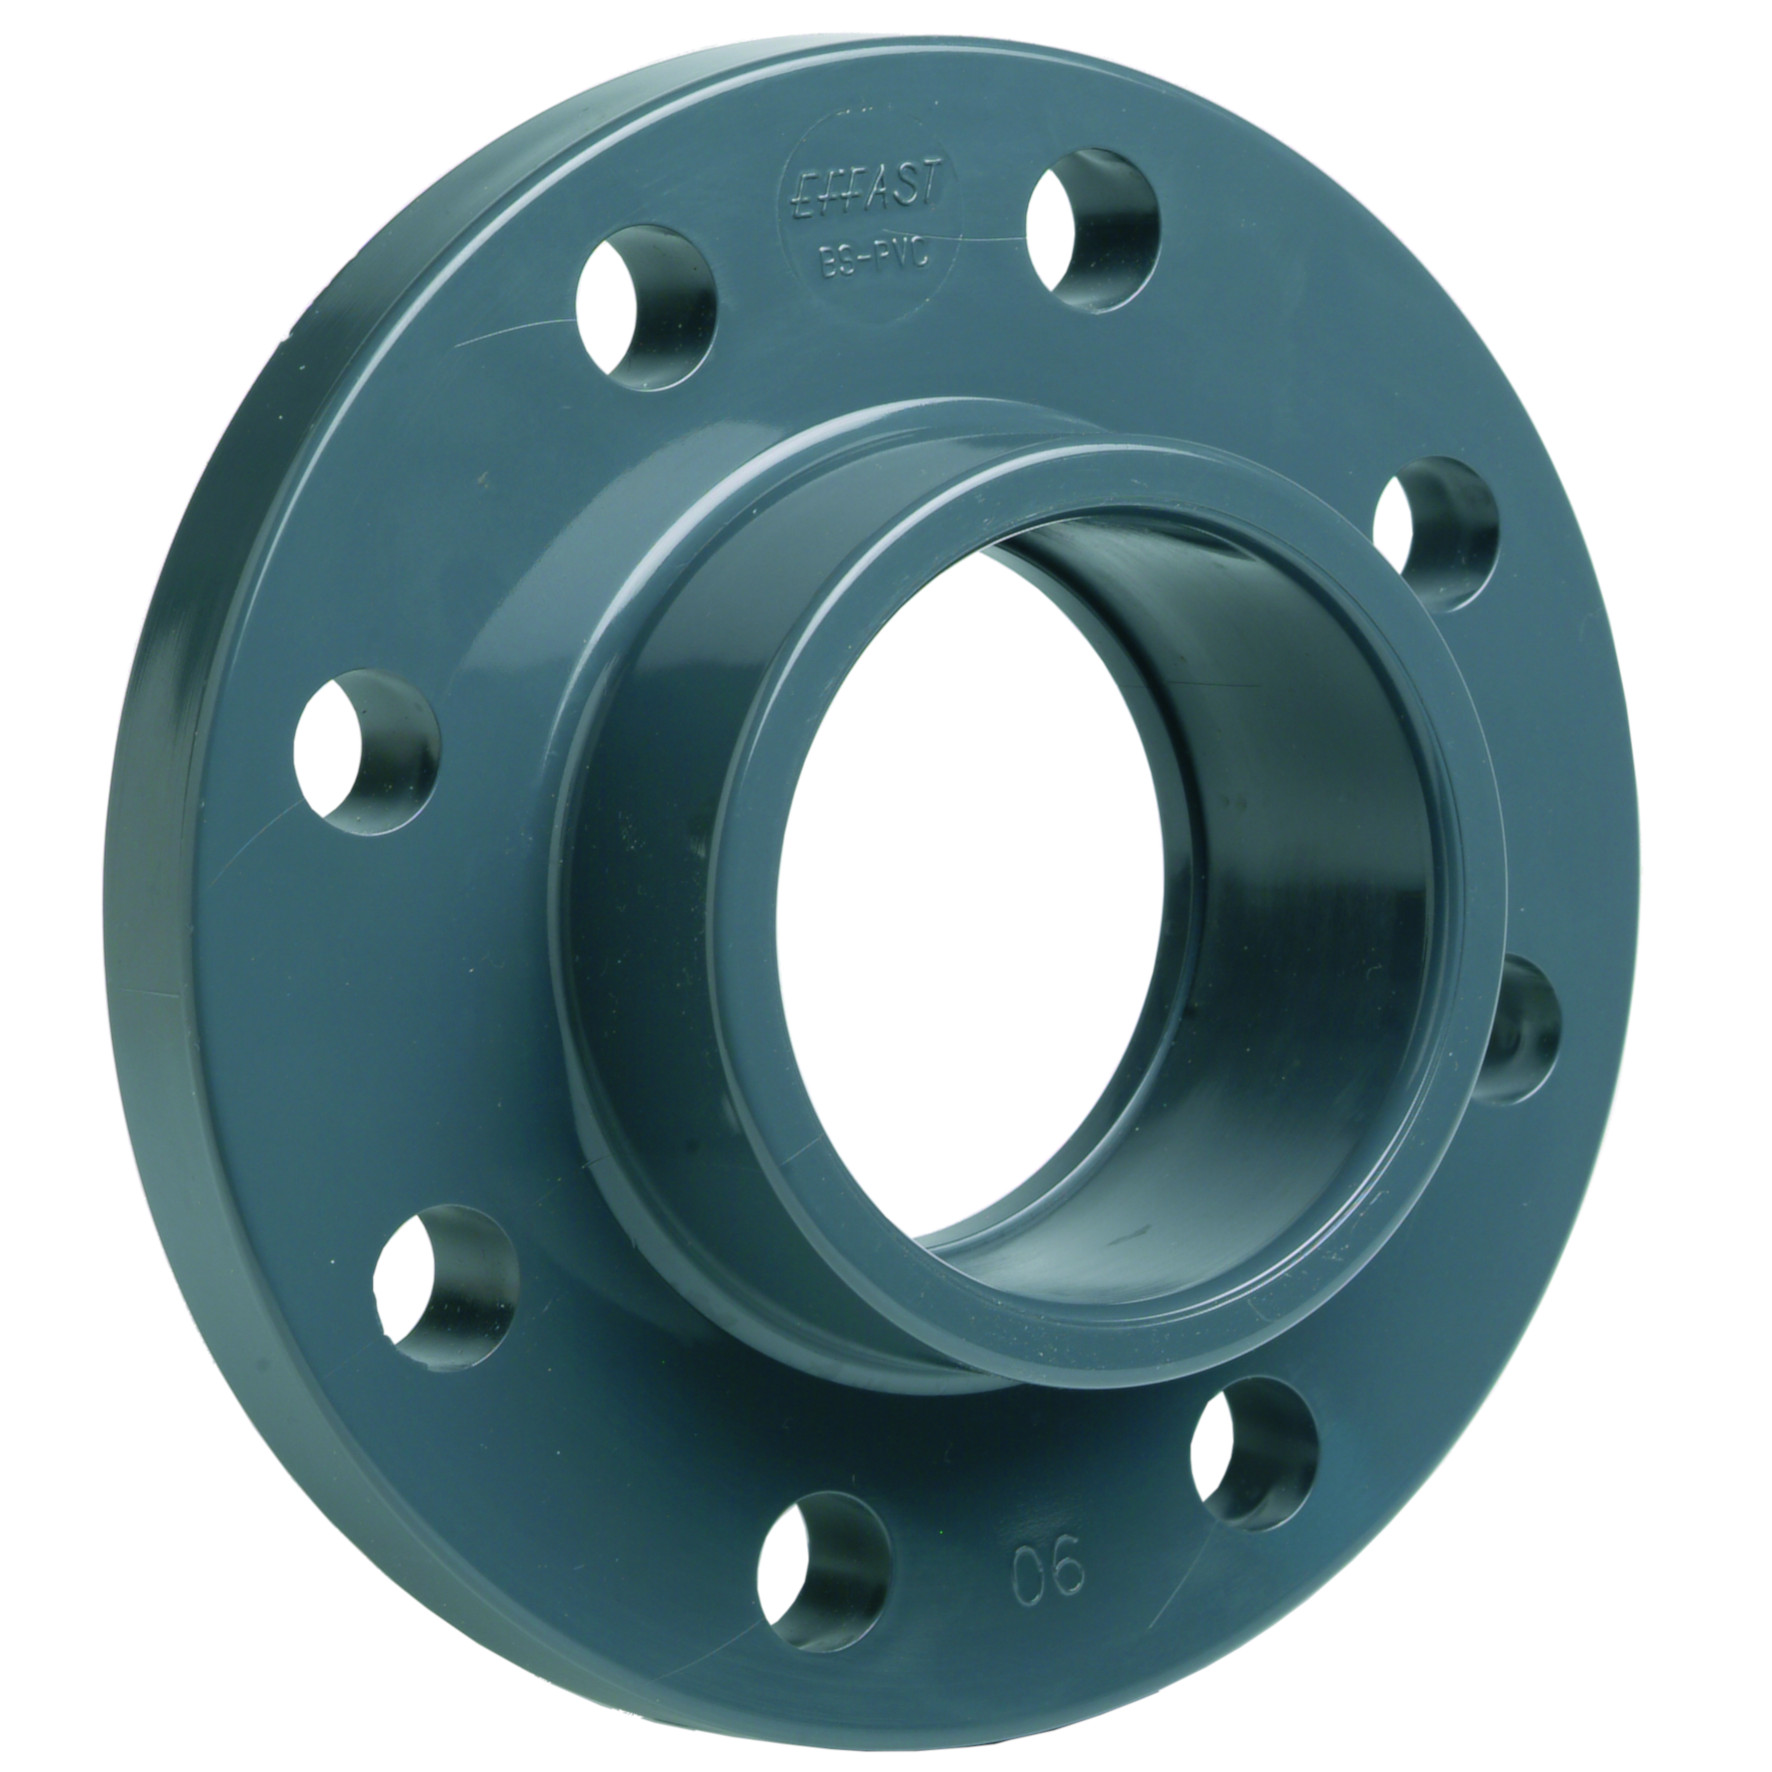 PVC-U fixed flange EN/ISO/DIN - EFFAST - 100% Made in Italy